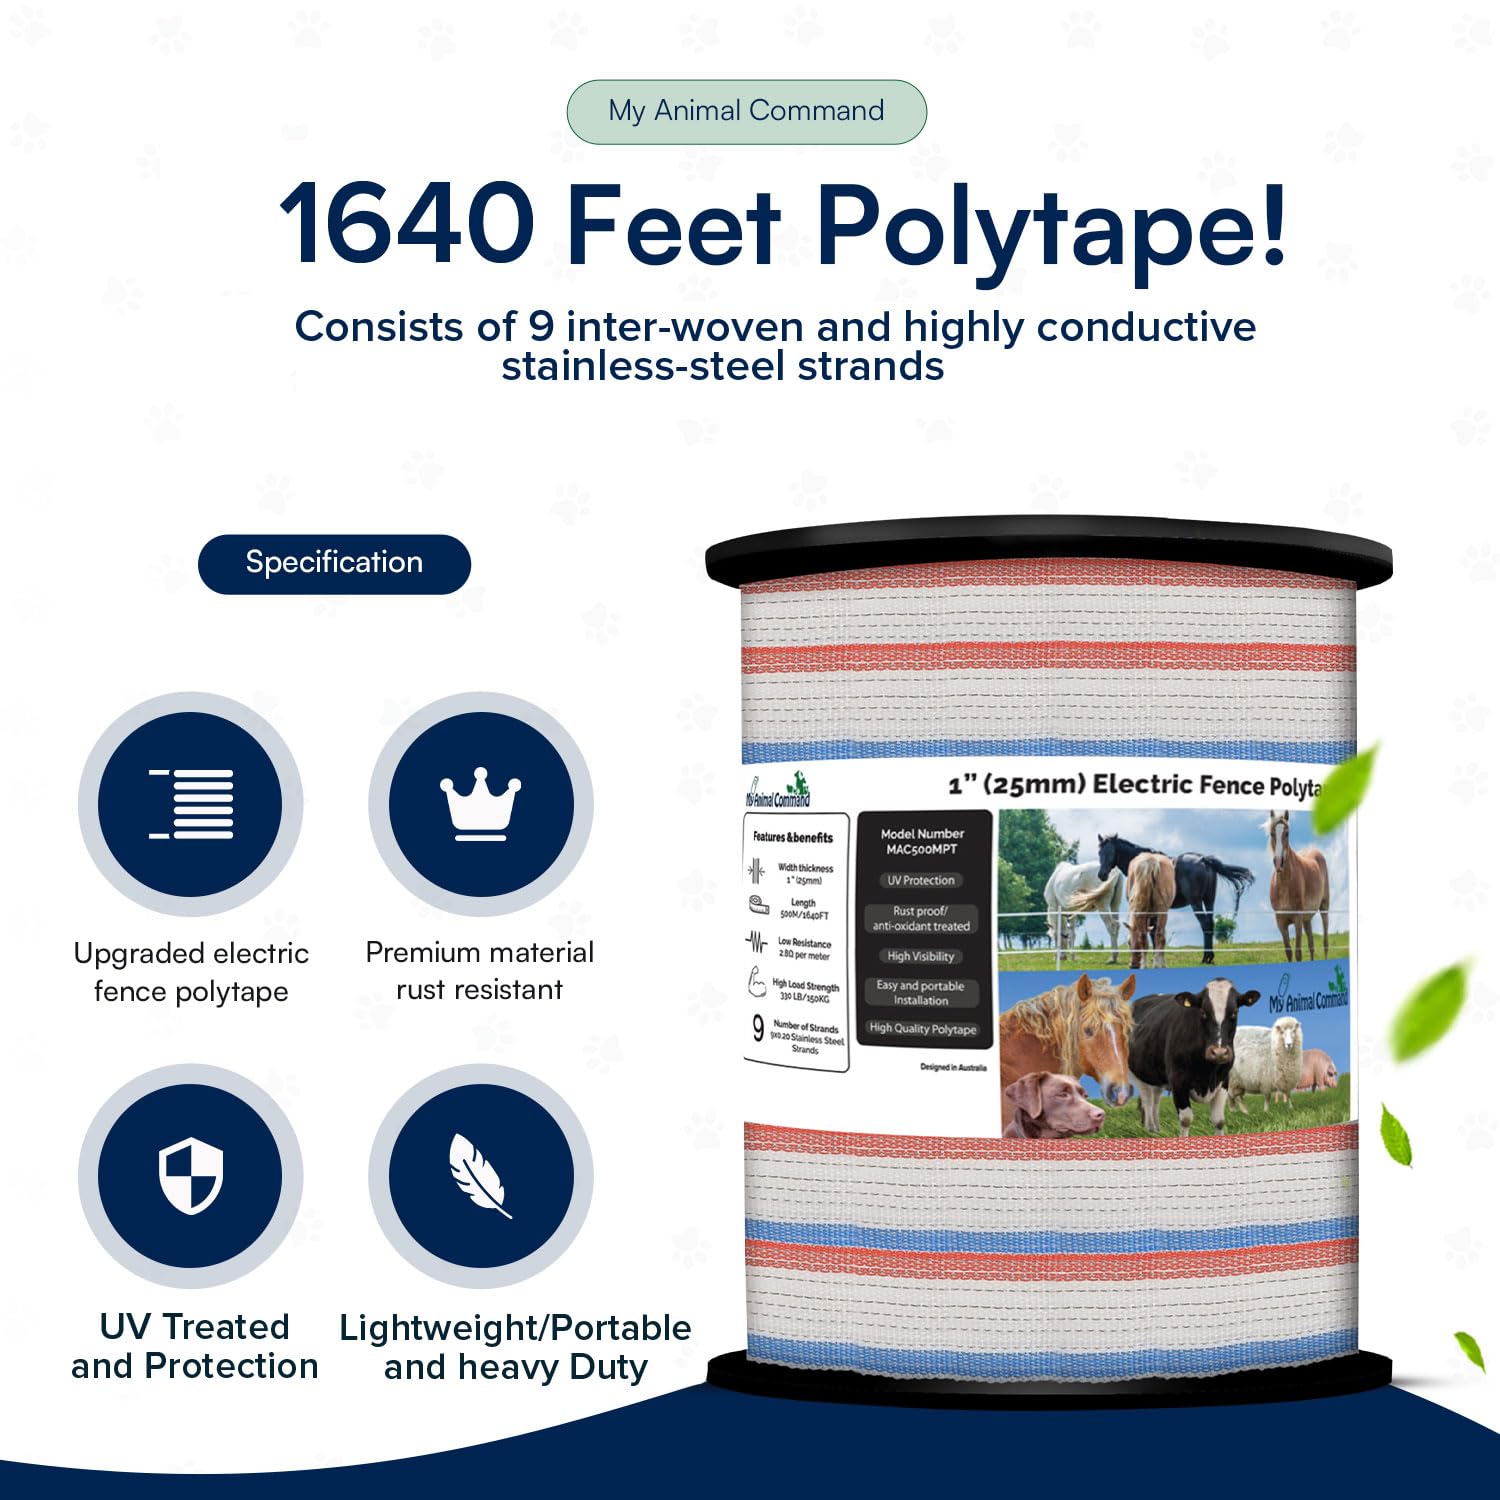 1 inch electric fence polytape - High Quality Poly tape 1640 feet